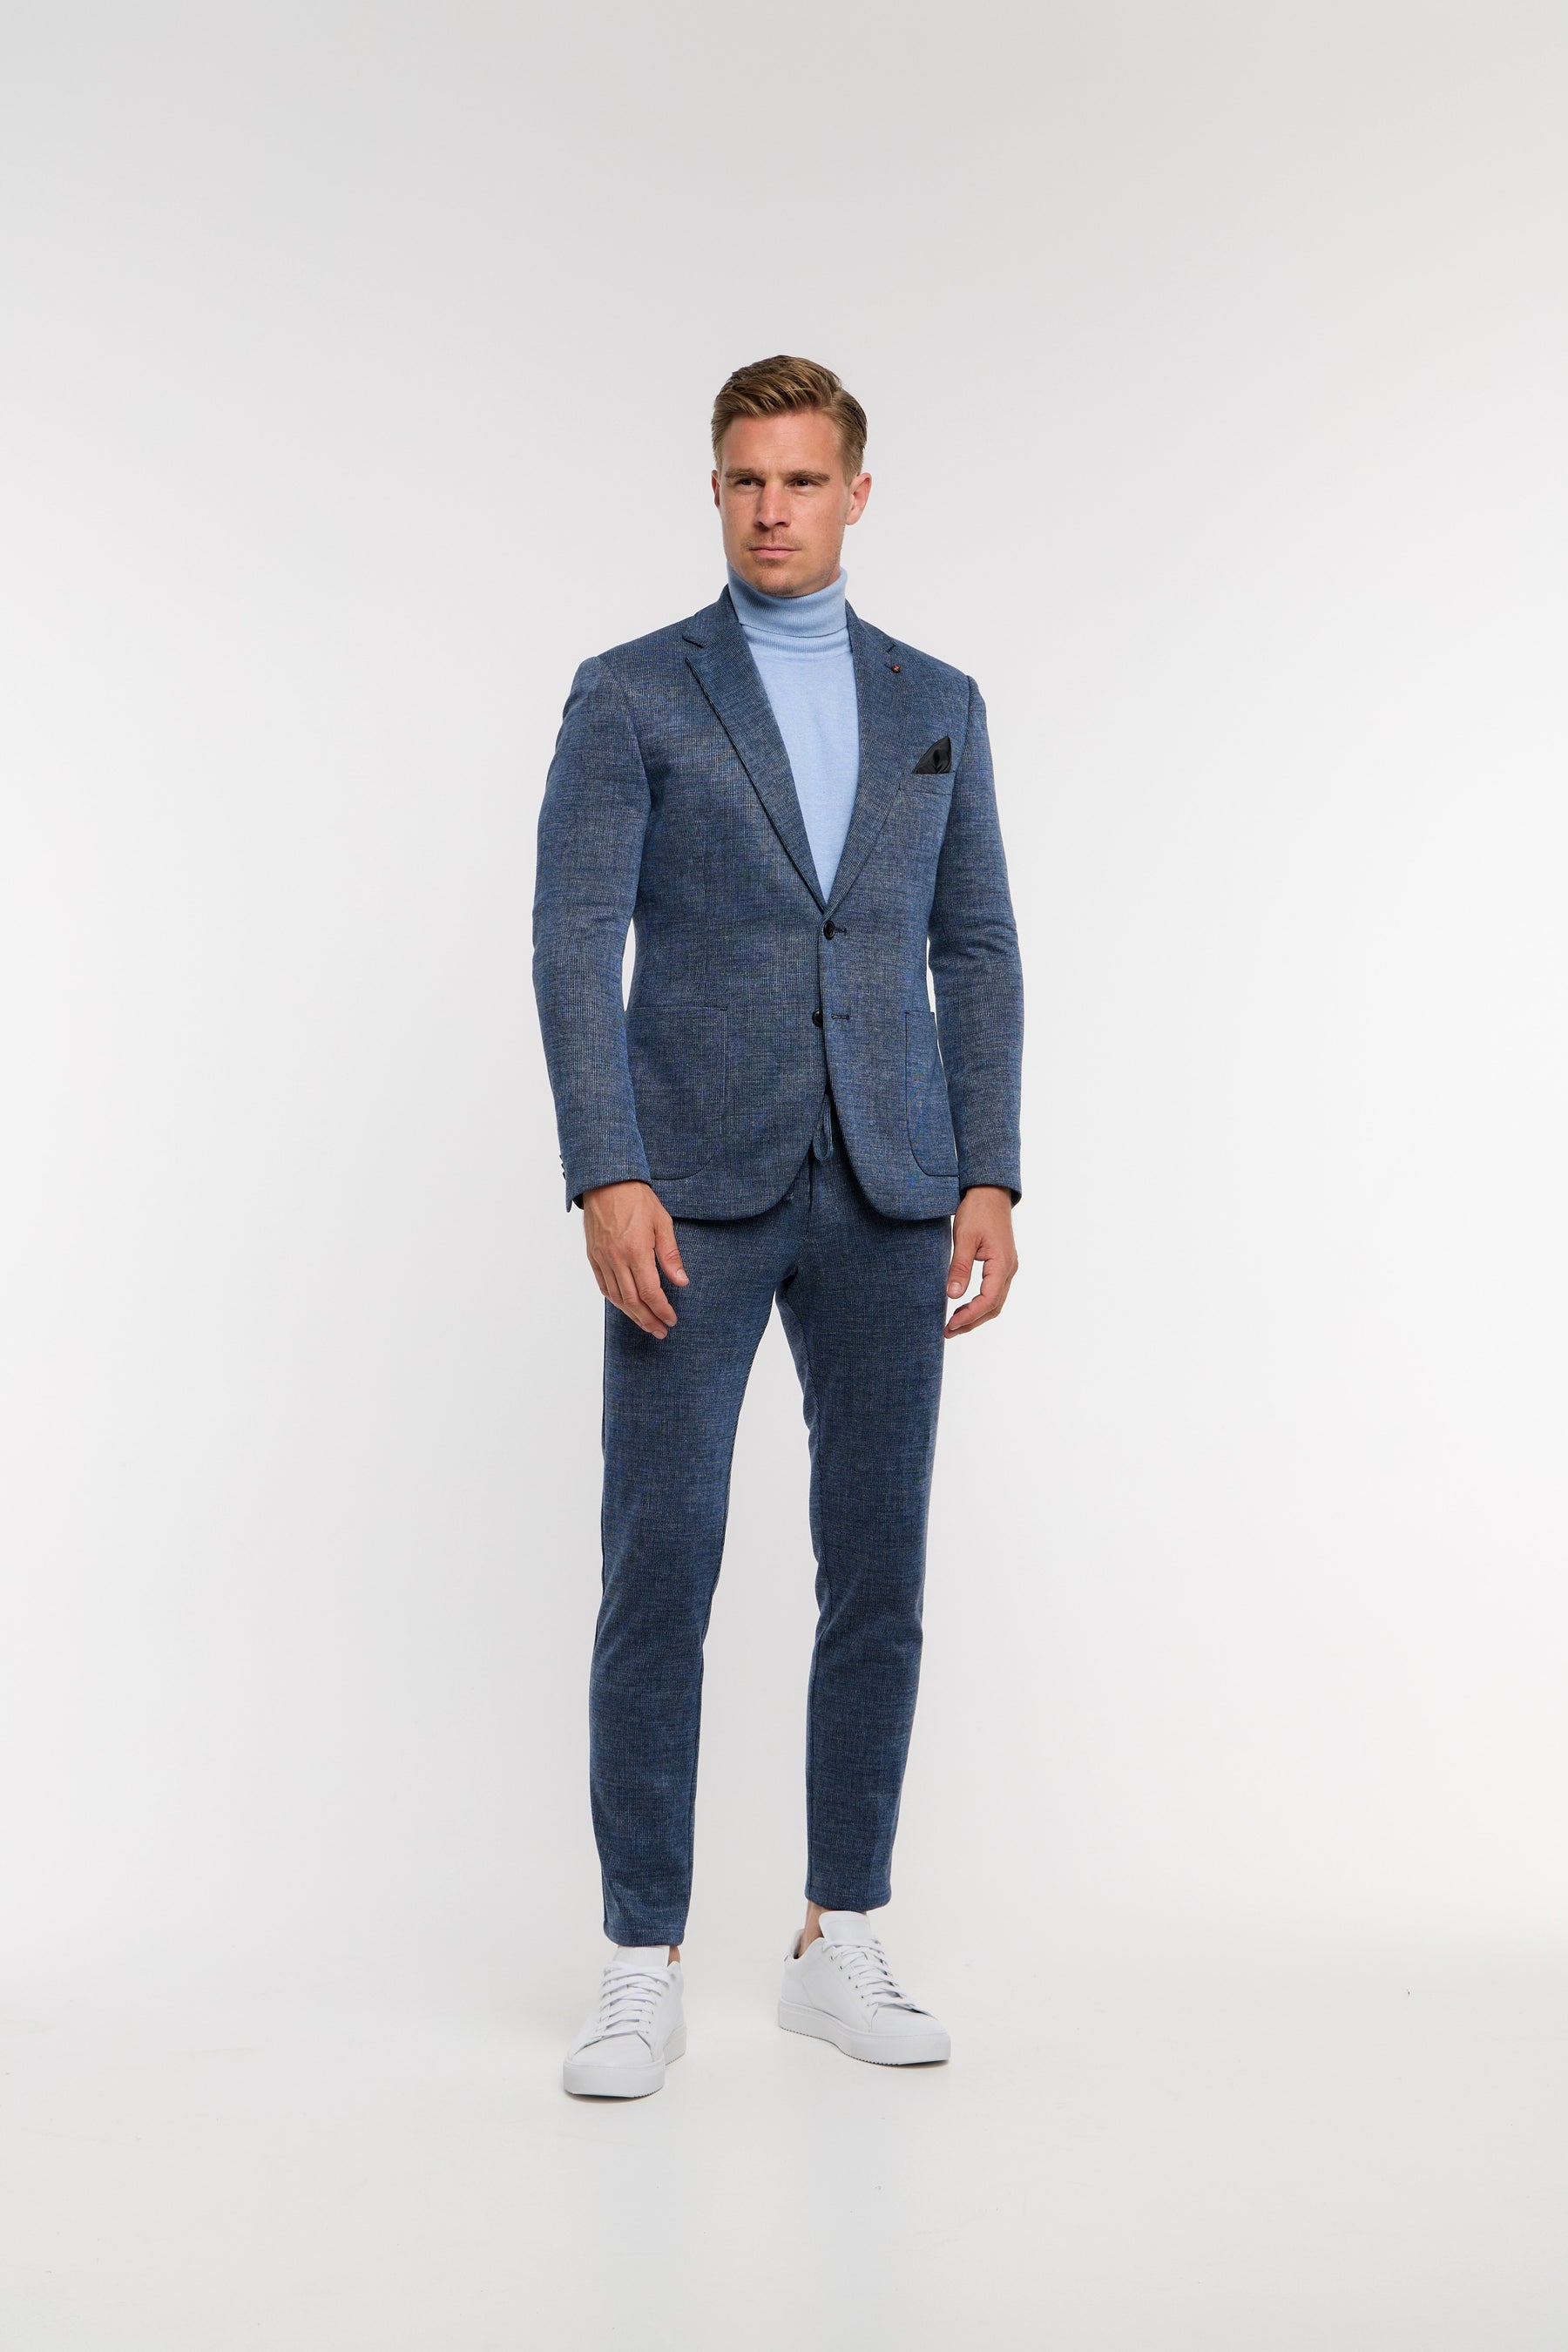 Loro Piana Charcoal Jersey Suit by Knot Standard